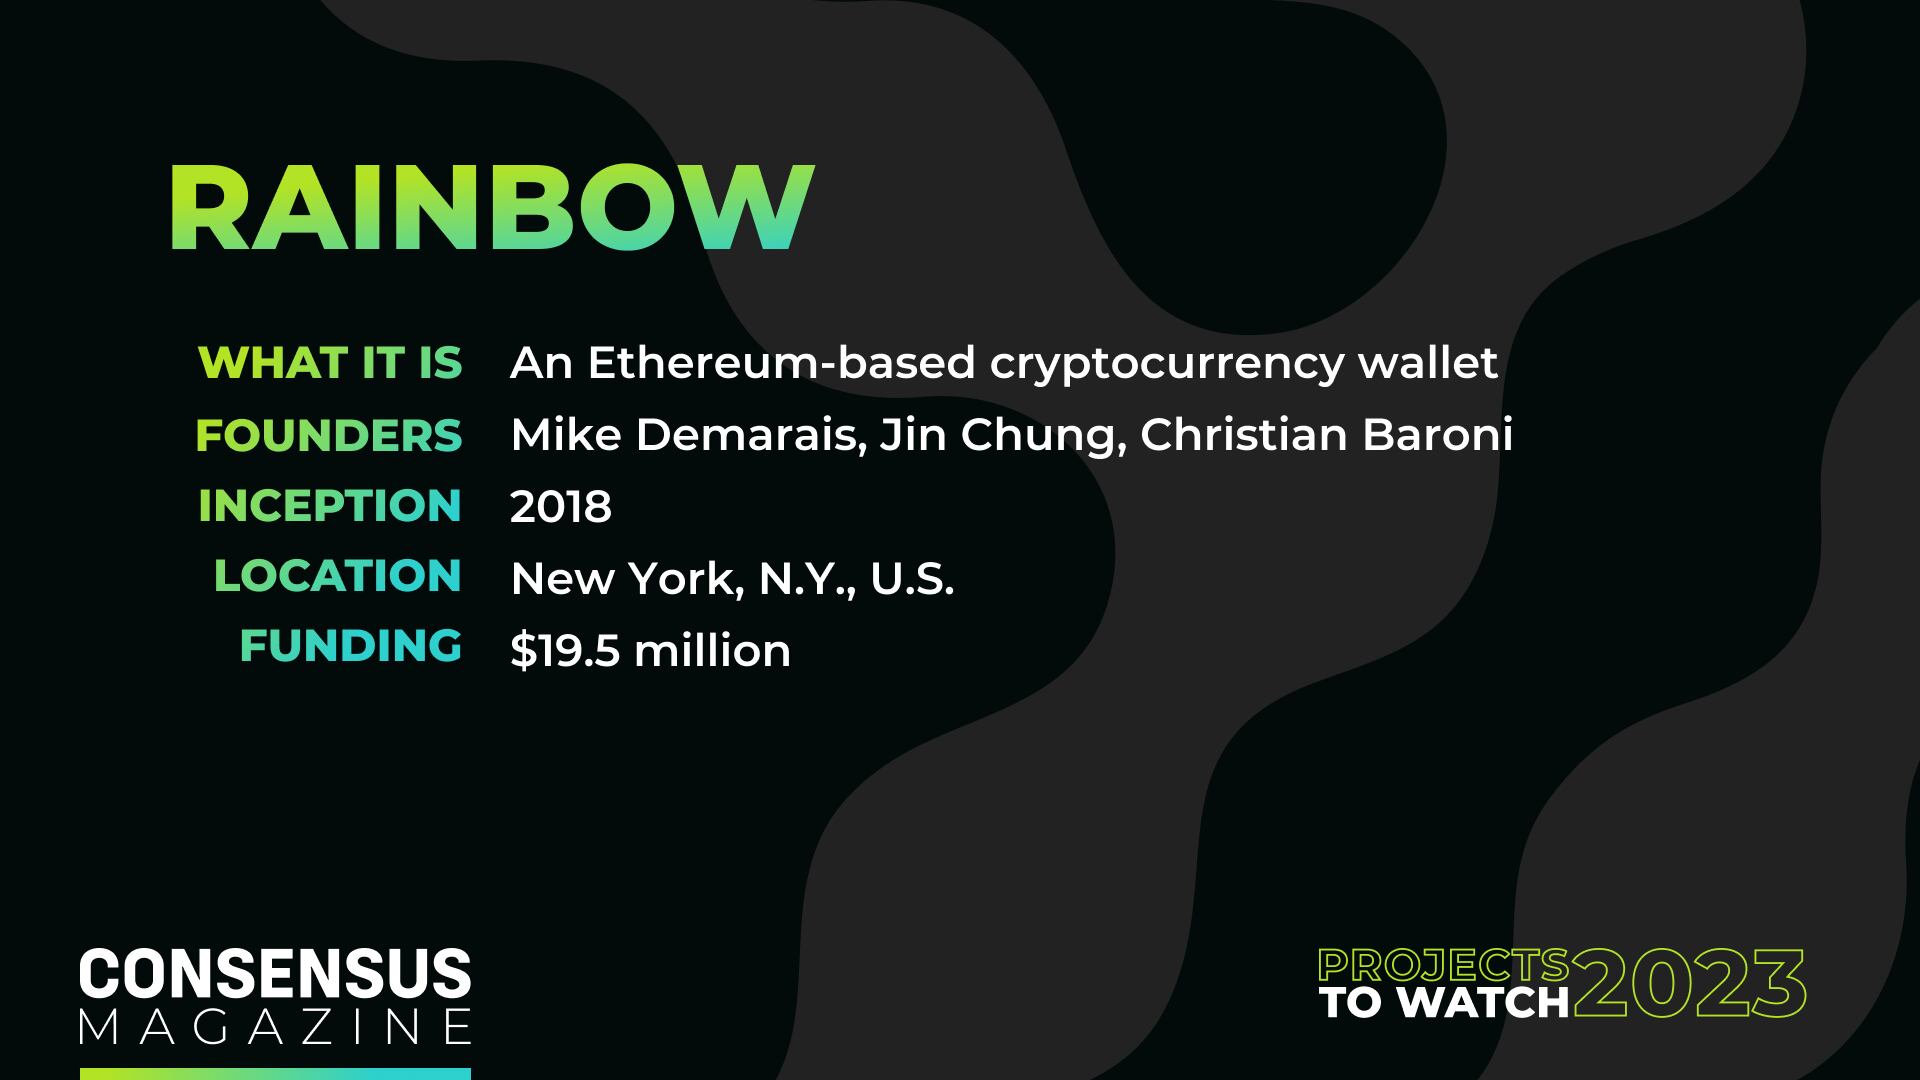 Know about rainbow Ethereum wallet: $18 million funding, features, and more  - The Coin Republic